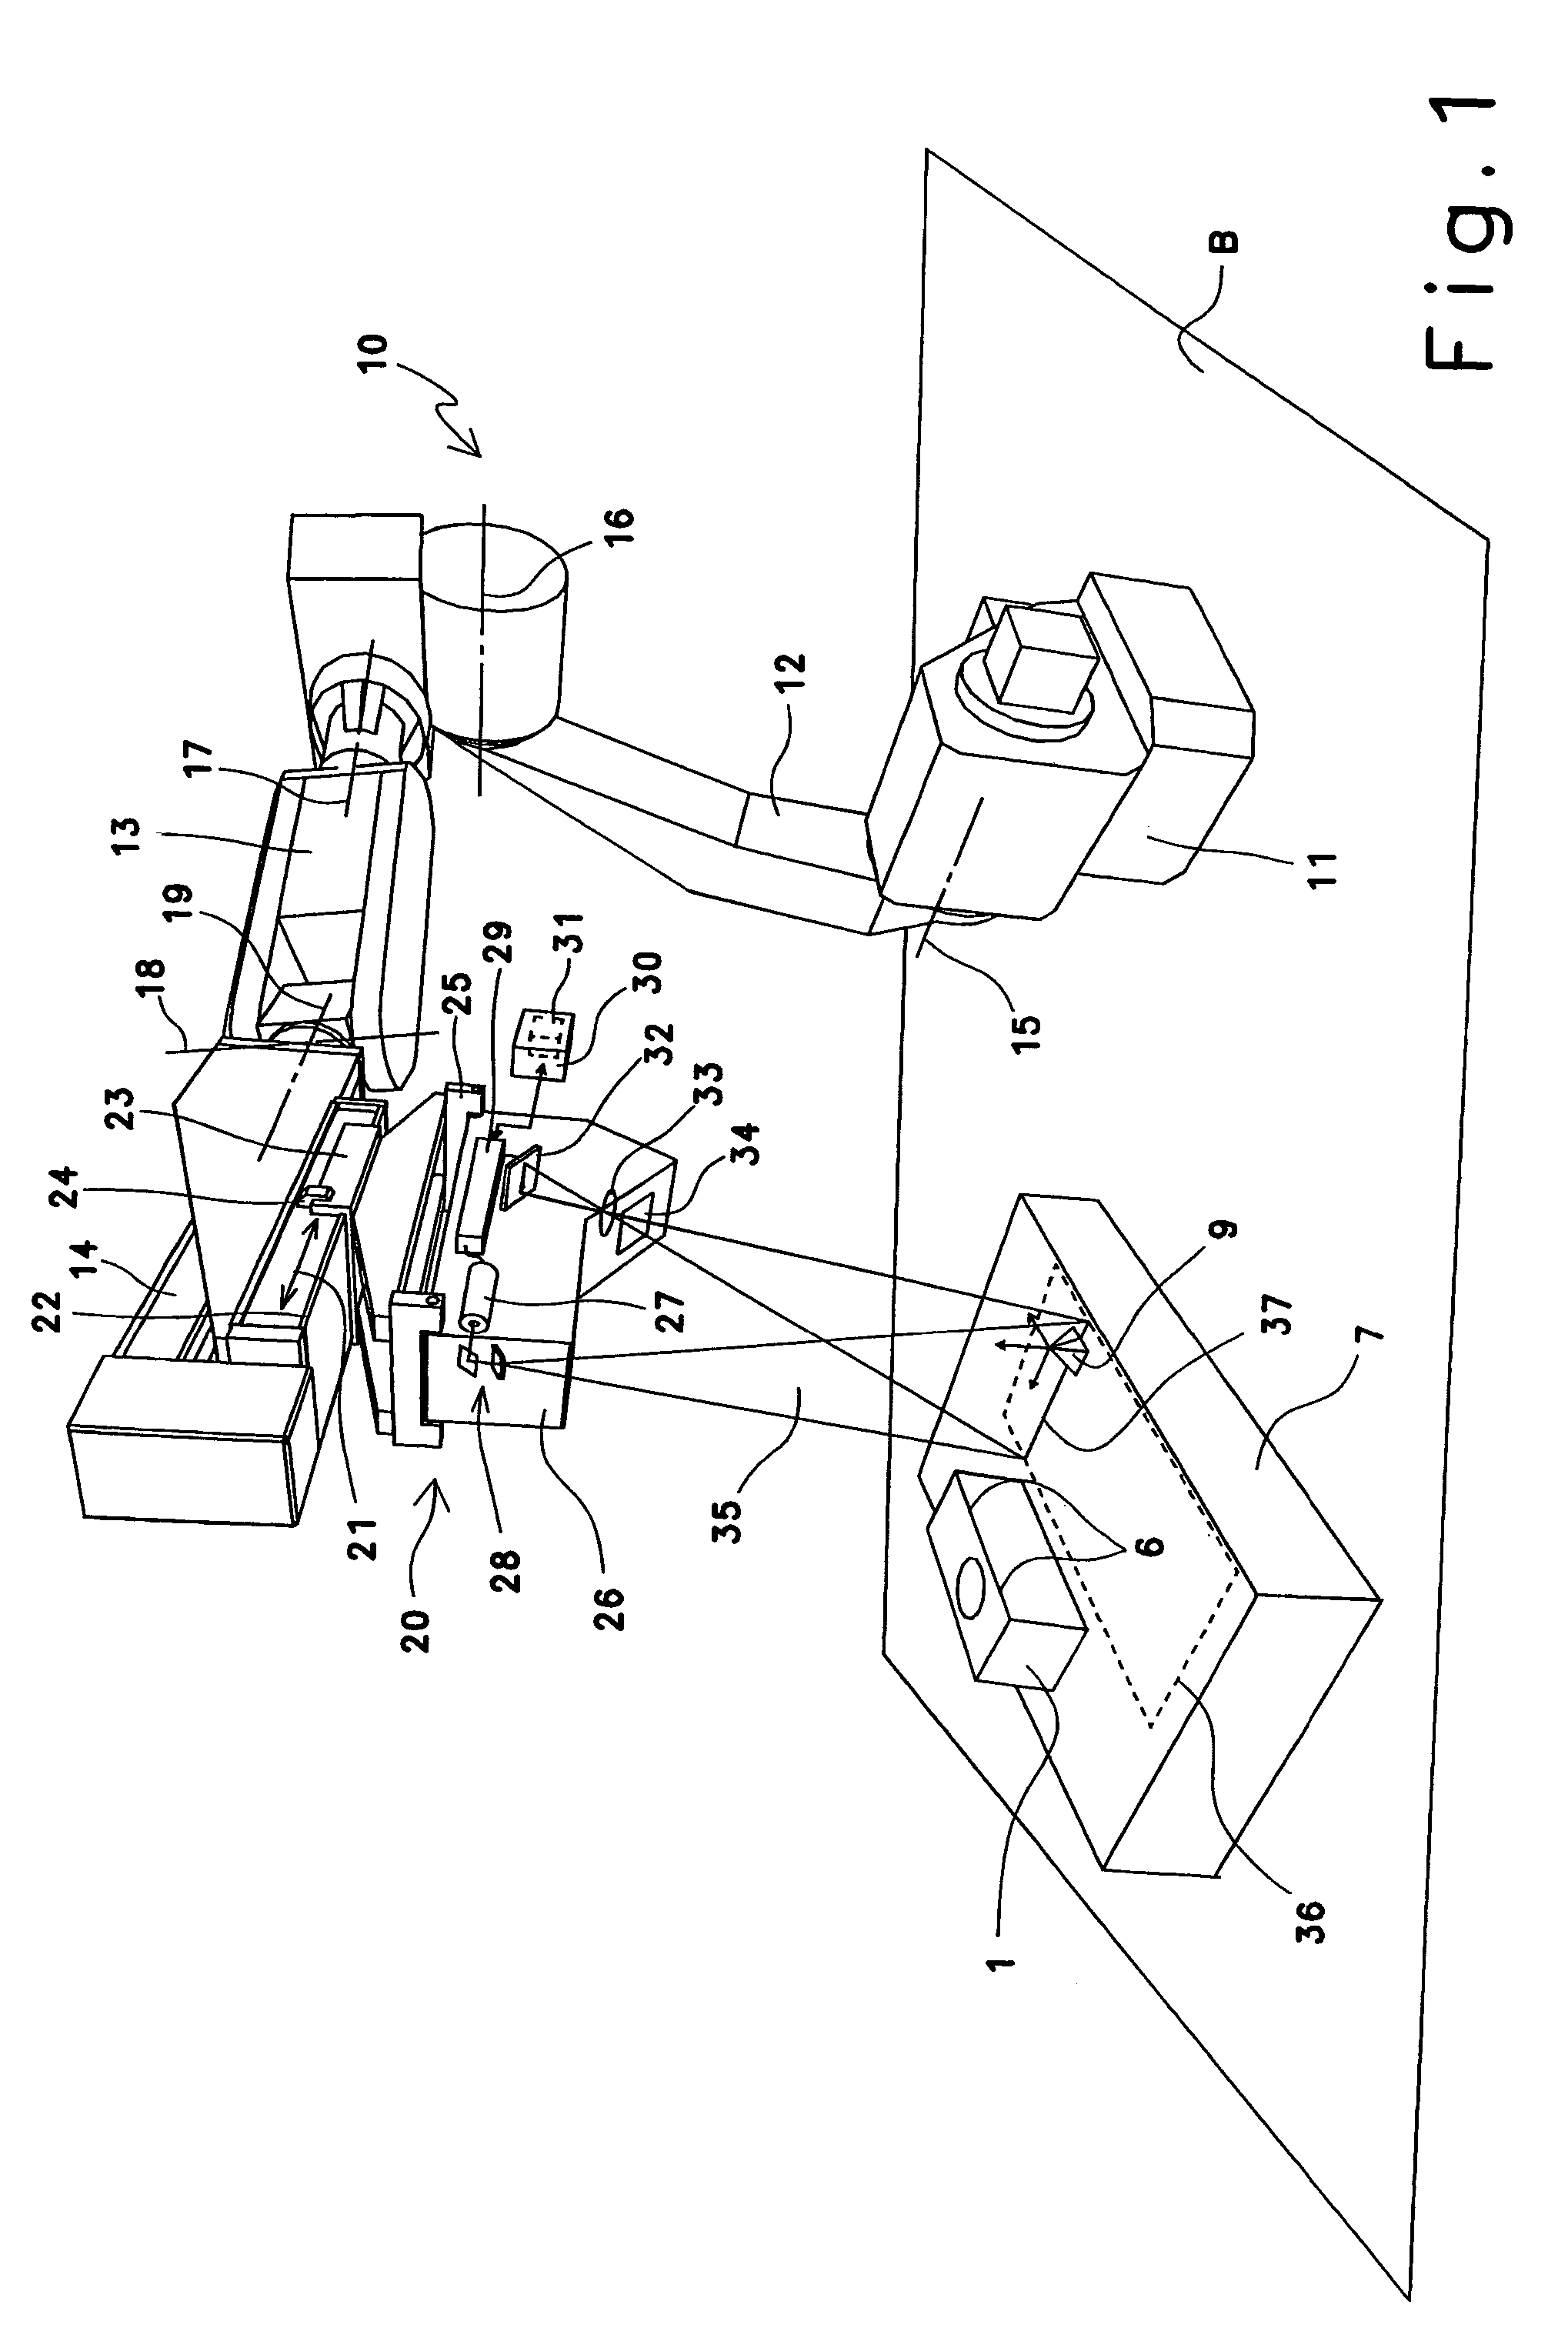 Device and method for measuring components